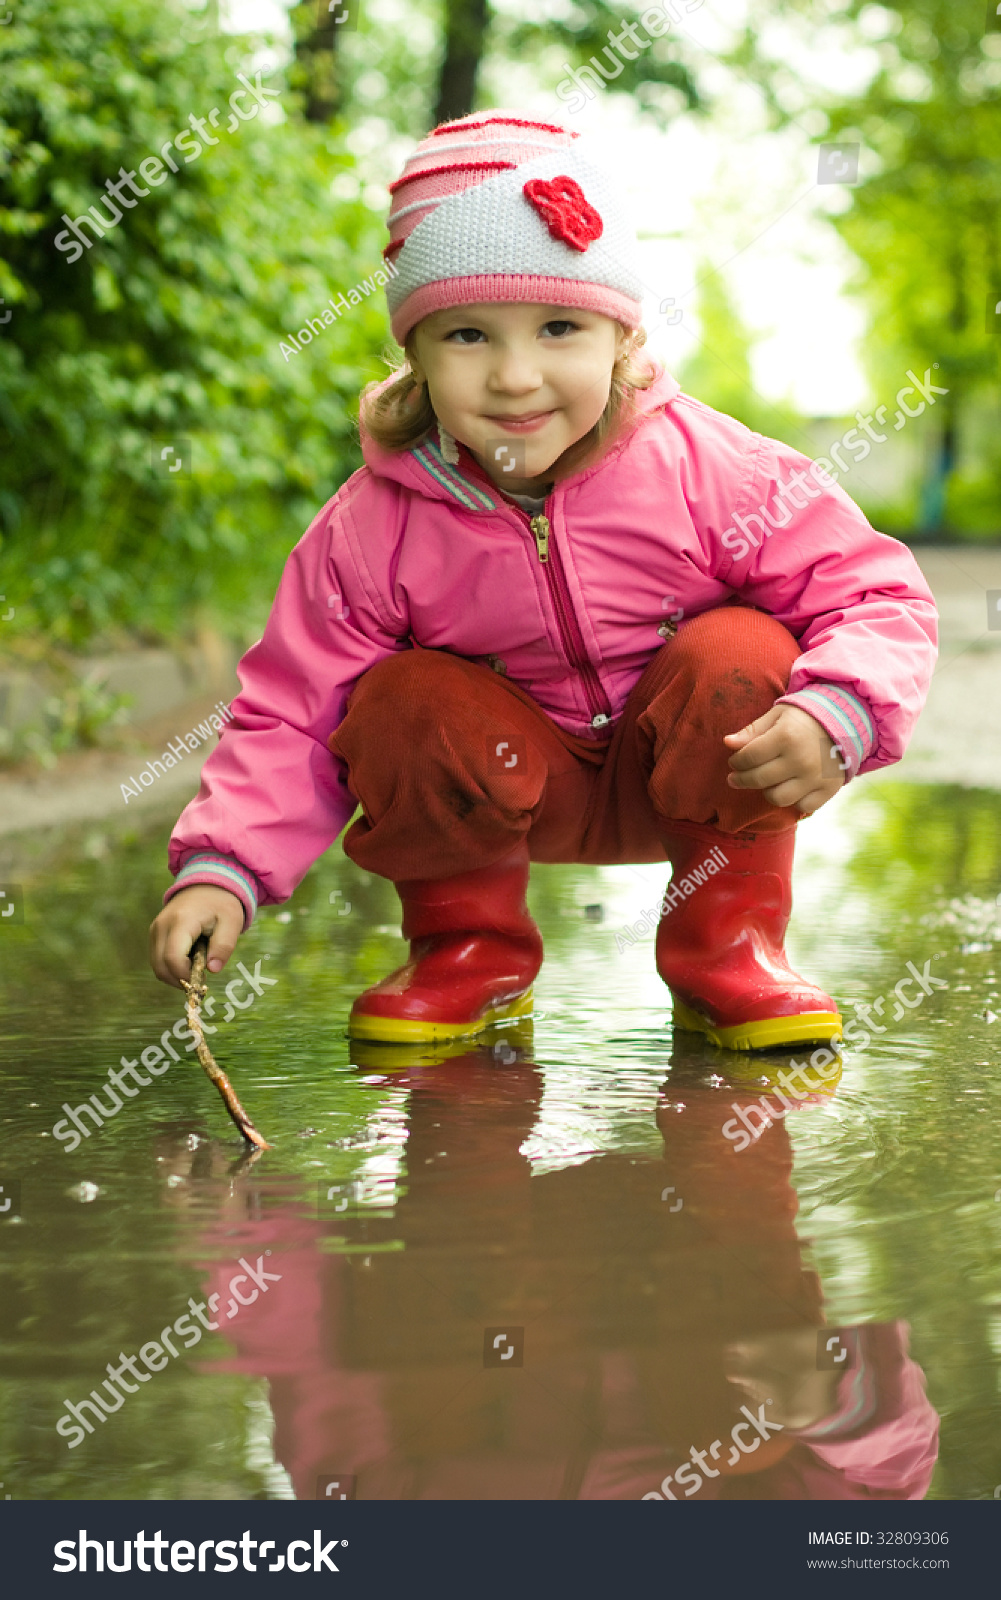 Girl Plays In The Puddle Stock Photo 32809306 : Shutterstock